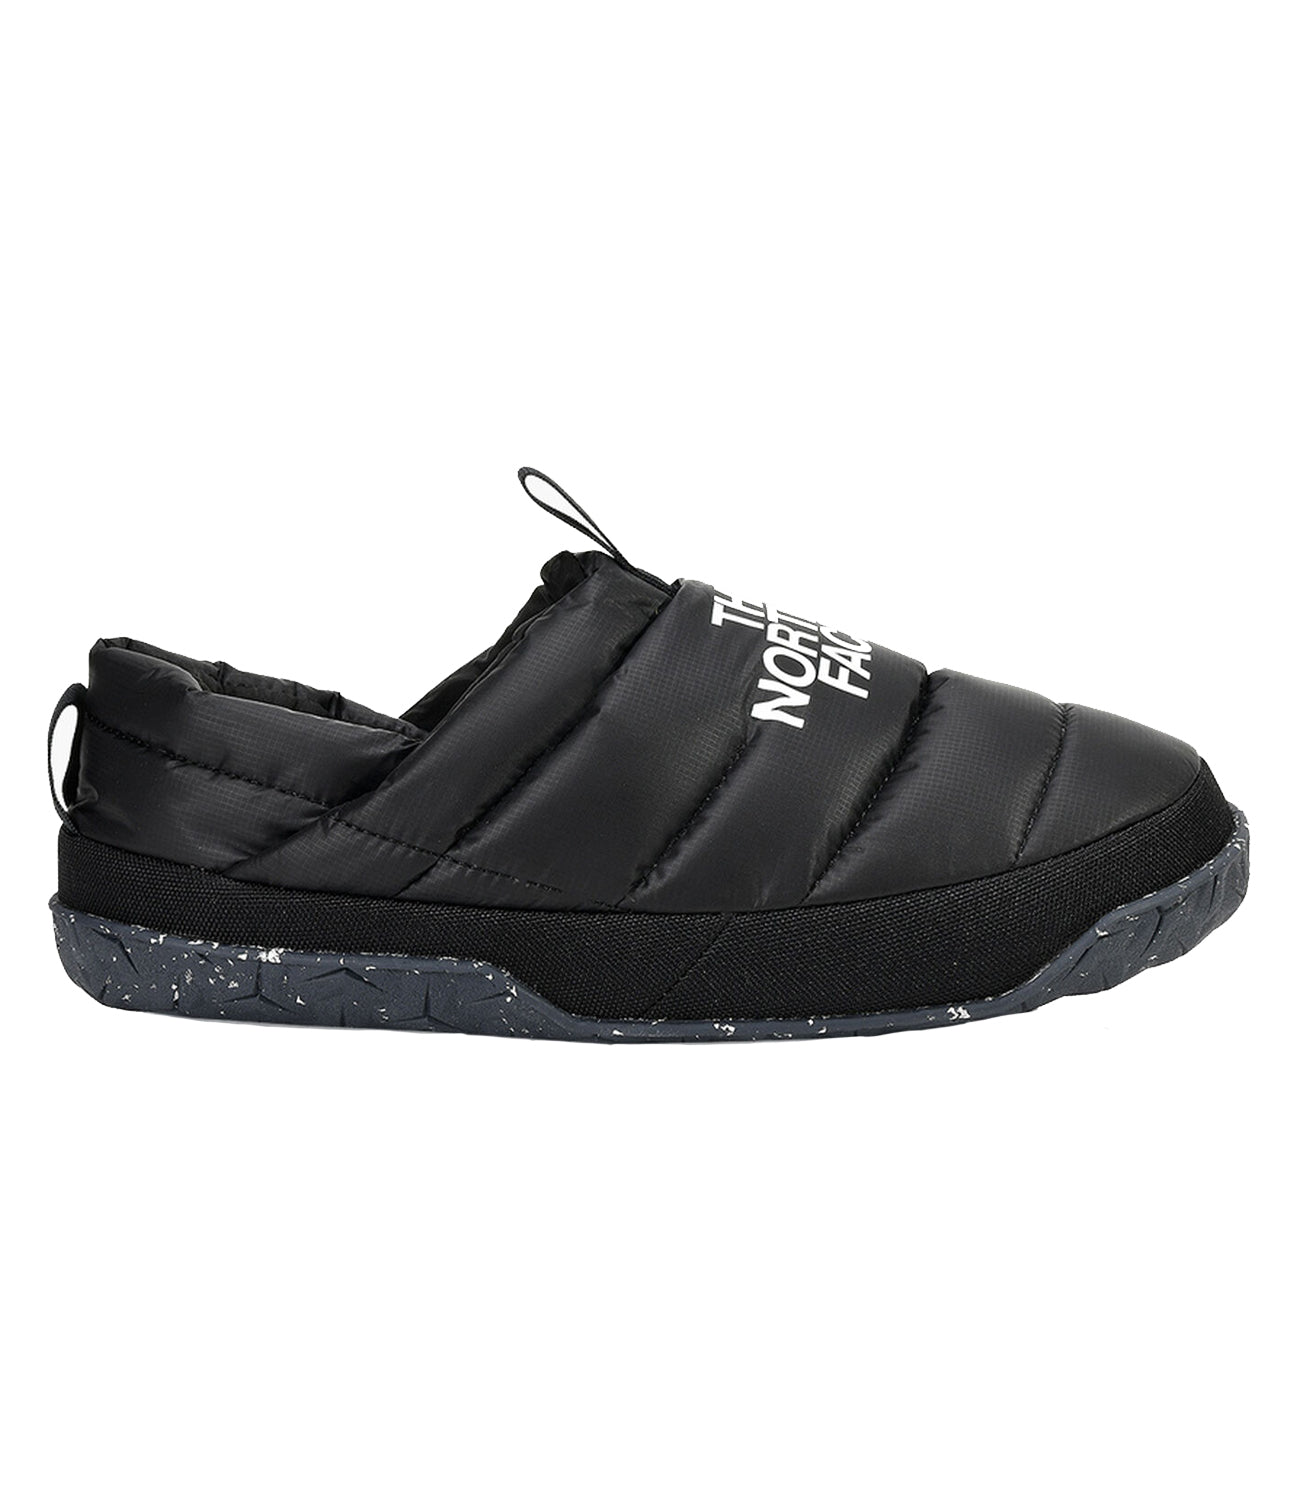 MENS NUPSTE MULE TNF BLACK
Durable and insulated with 550-fill down, the warm, comfortable Men’s Nuptse Mules will be your shoes of choice from fall to spring. NORTH FACE